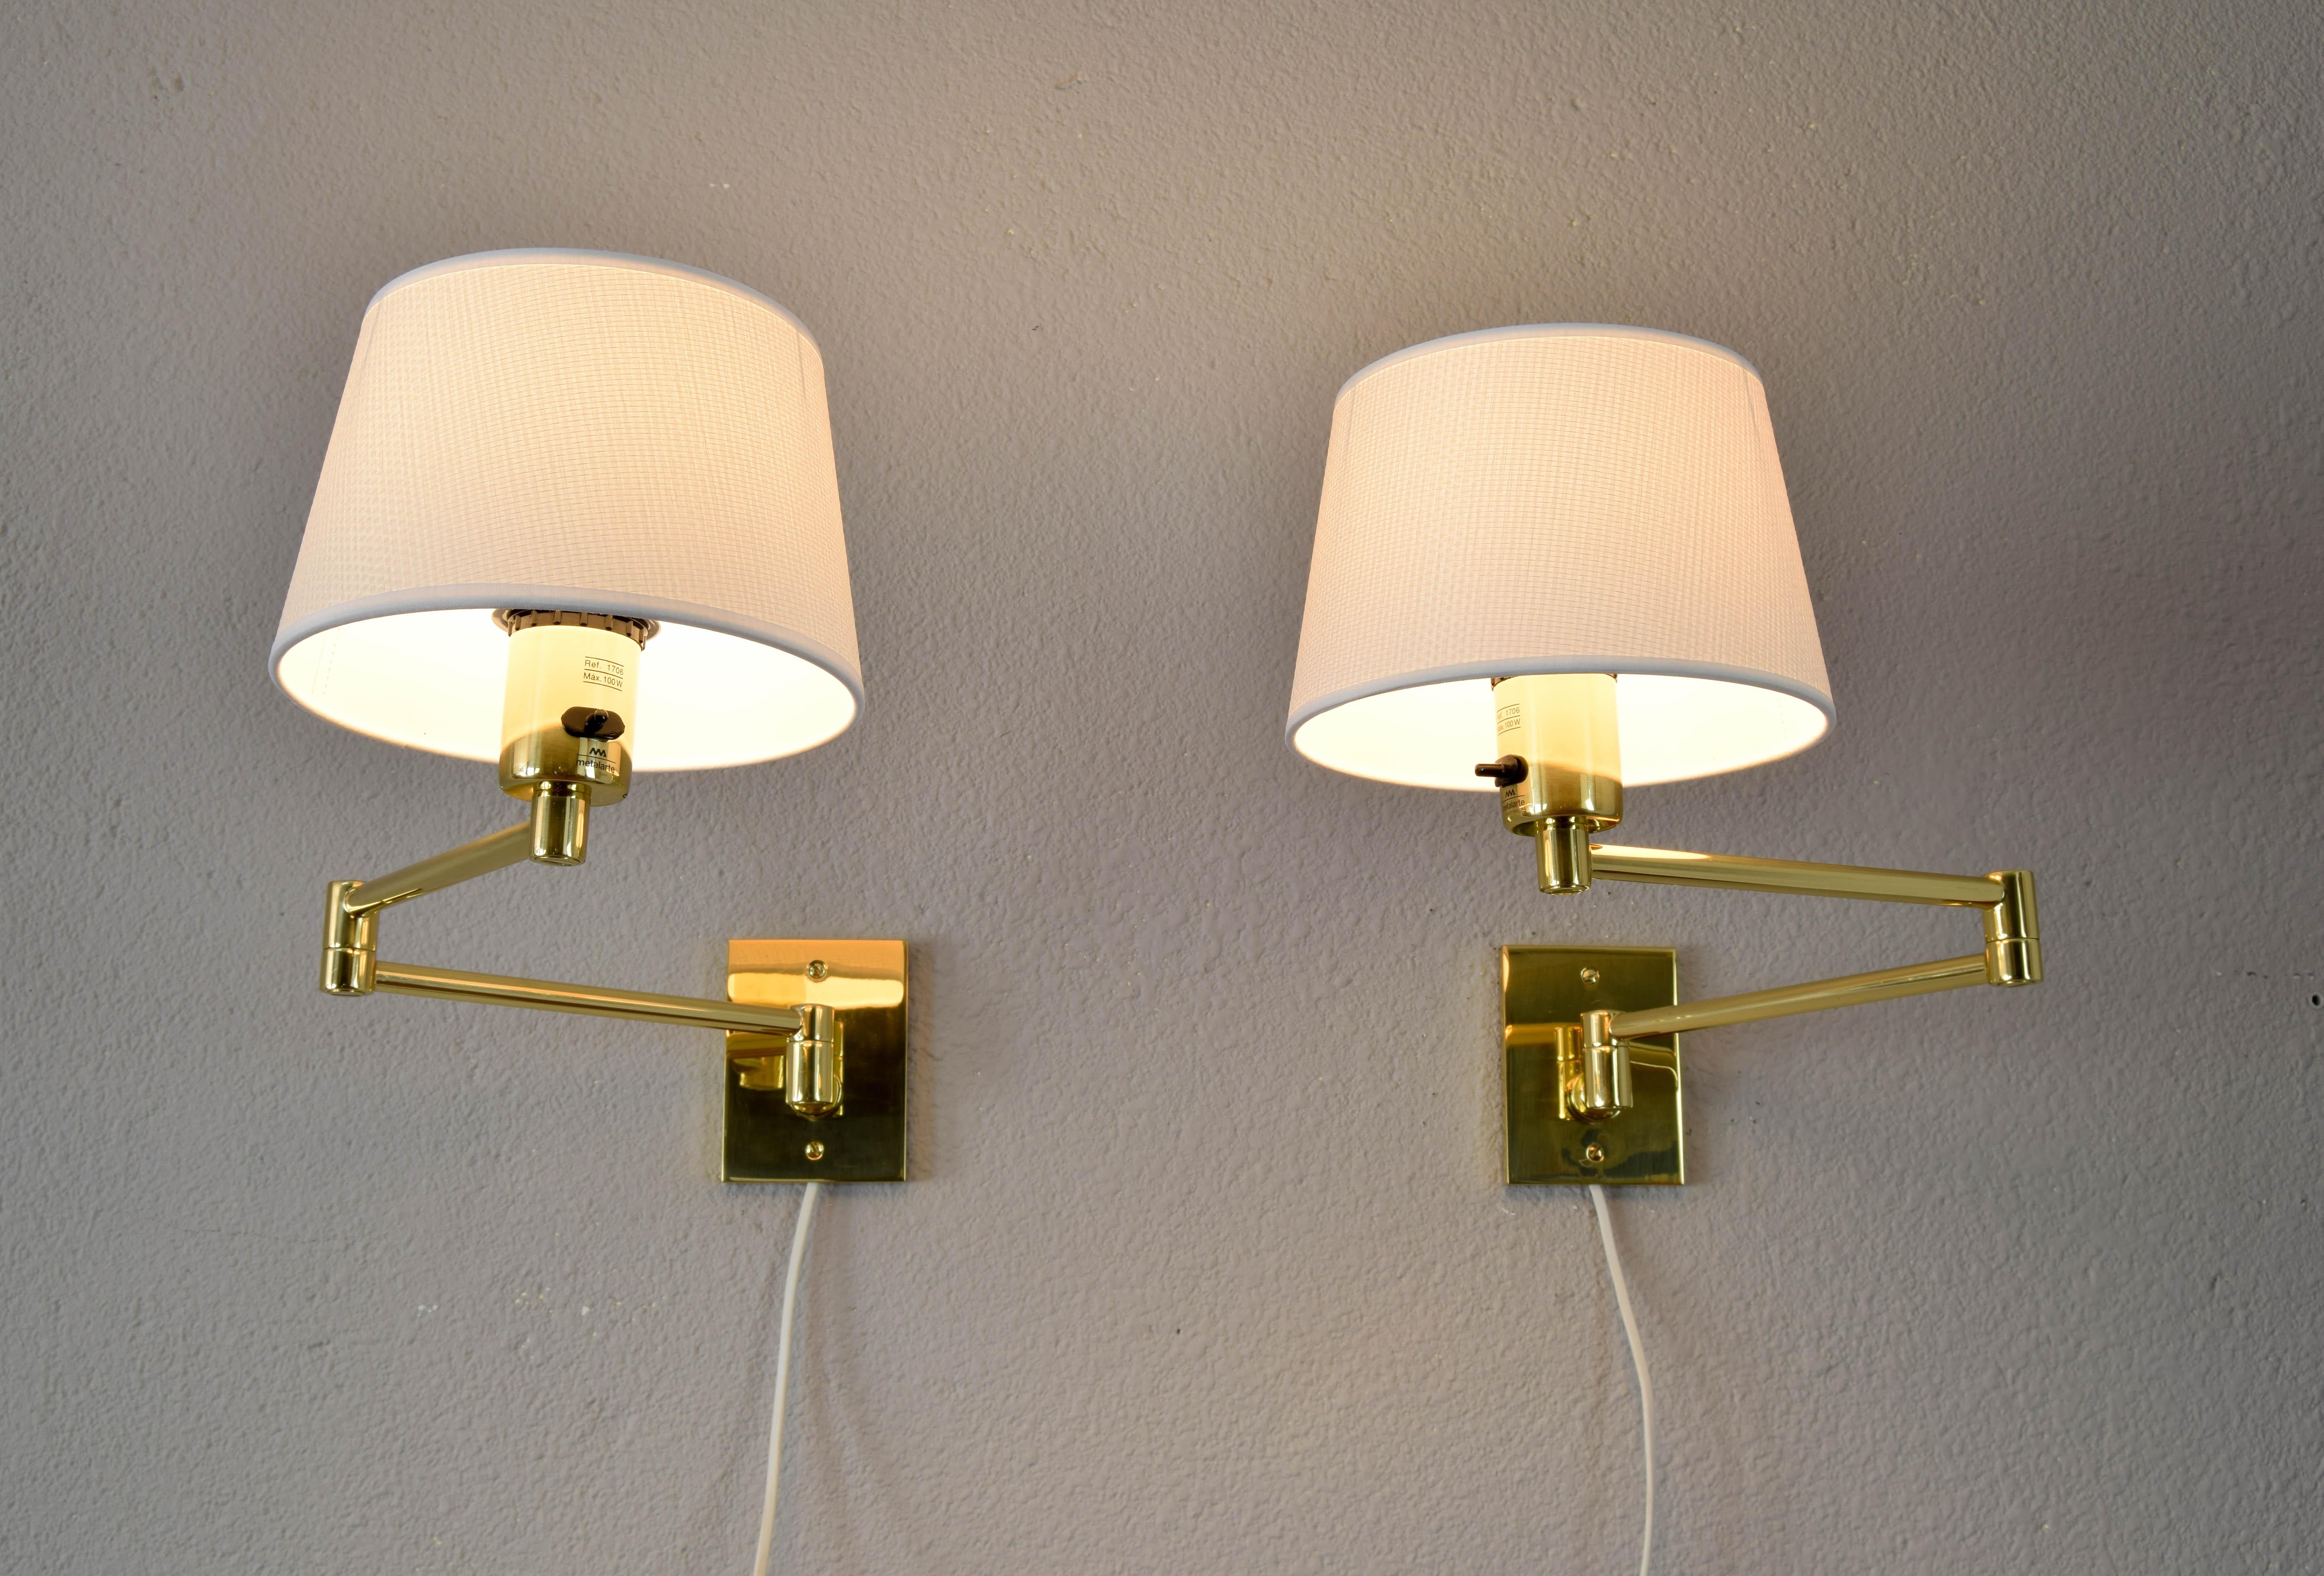 Two Mid-Century Modern Swing Arm Brass Sconces by George W Hansen for Metalarte 1